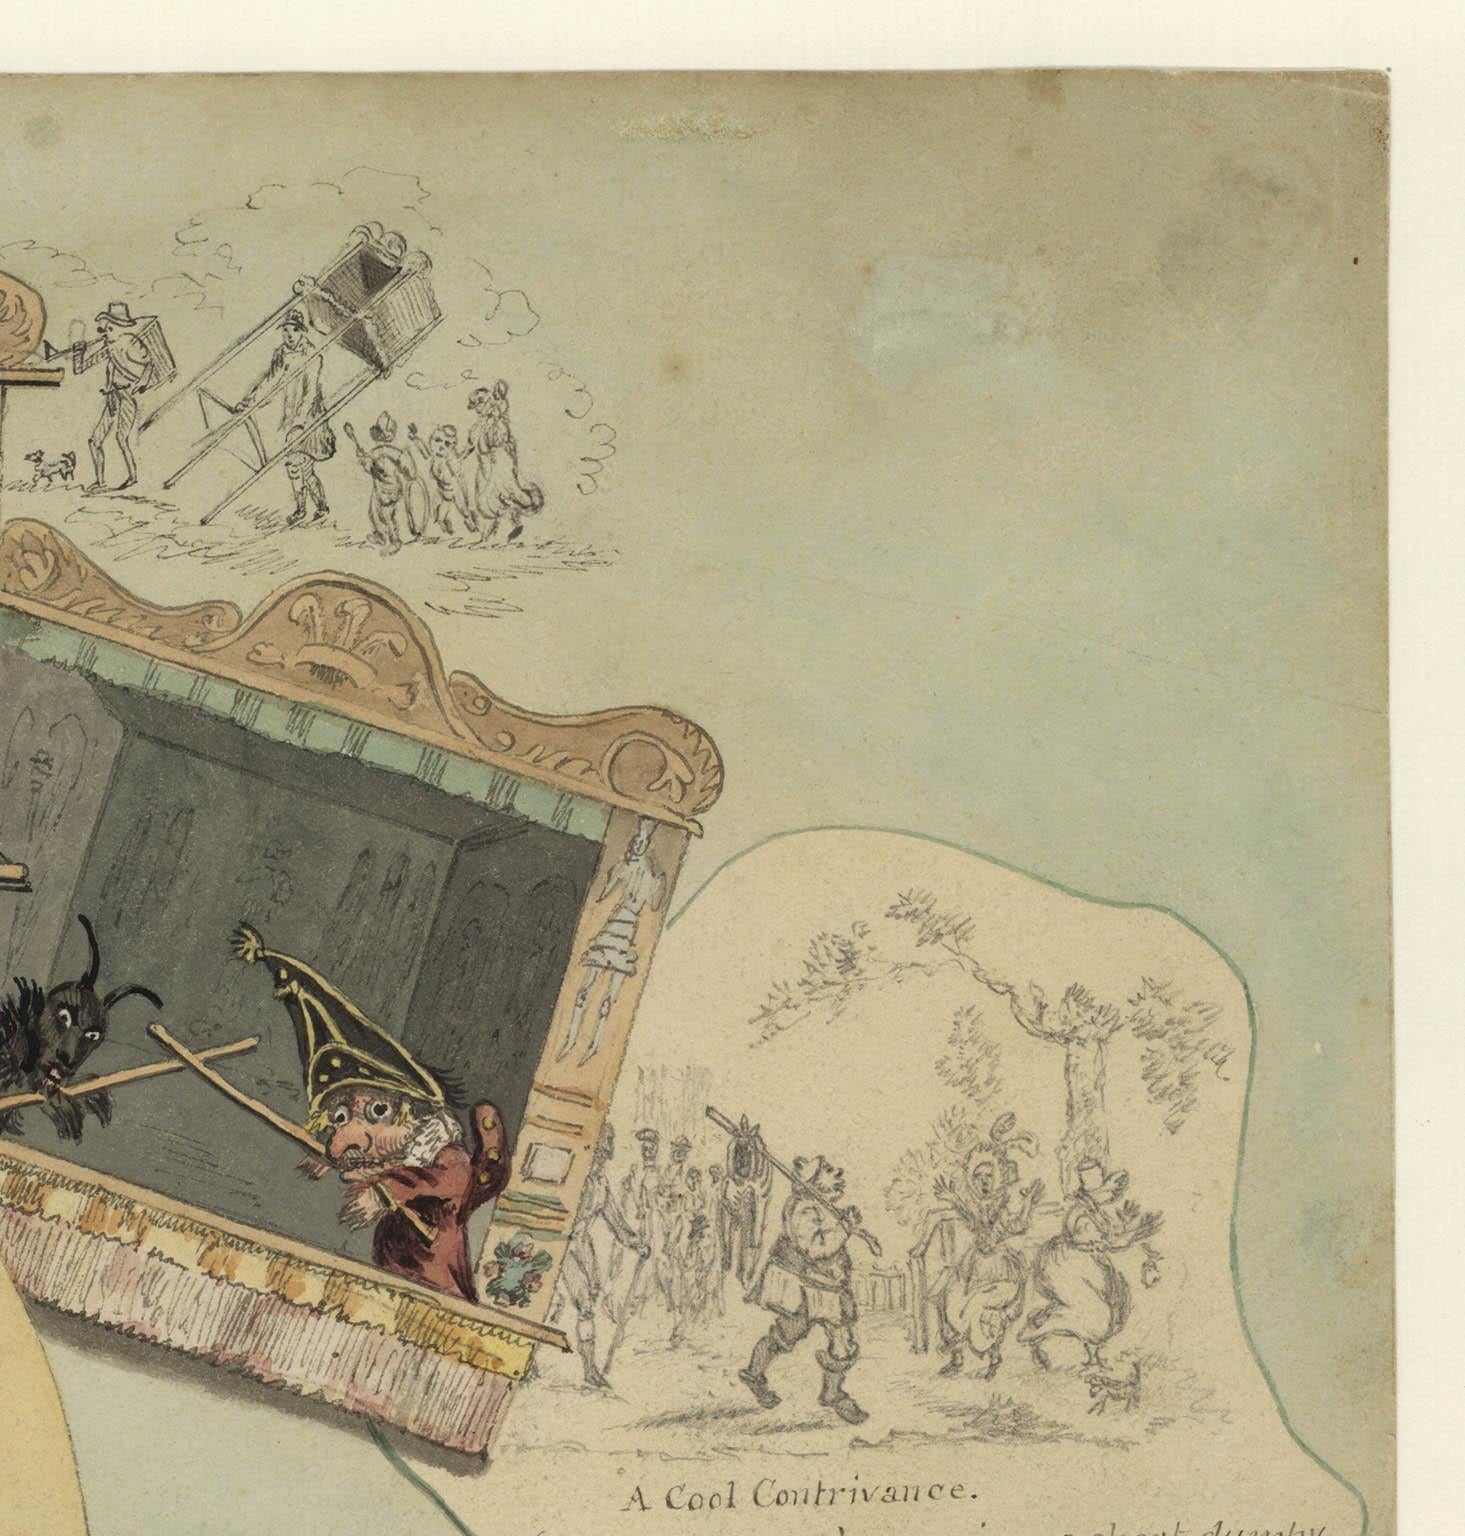 Trompe l'oeil.  [Punch and Judy].
Watercolor and drawing, undated, circa 1830.  Paper size 10.25 x 14